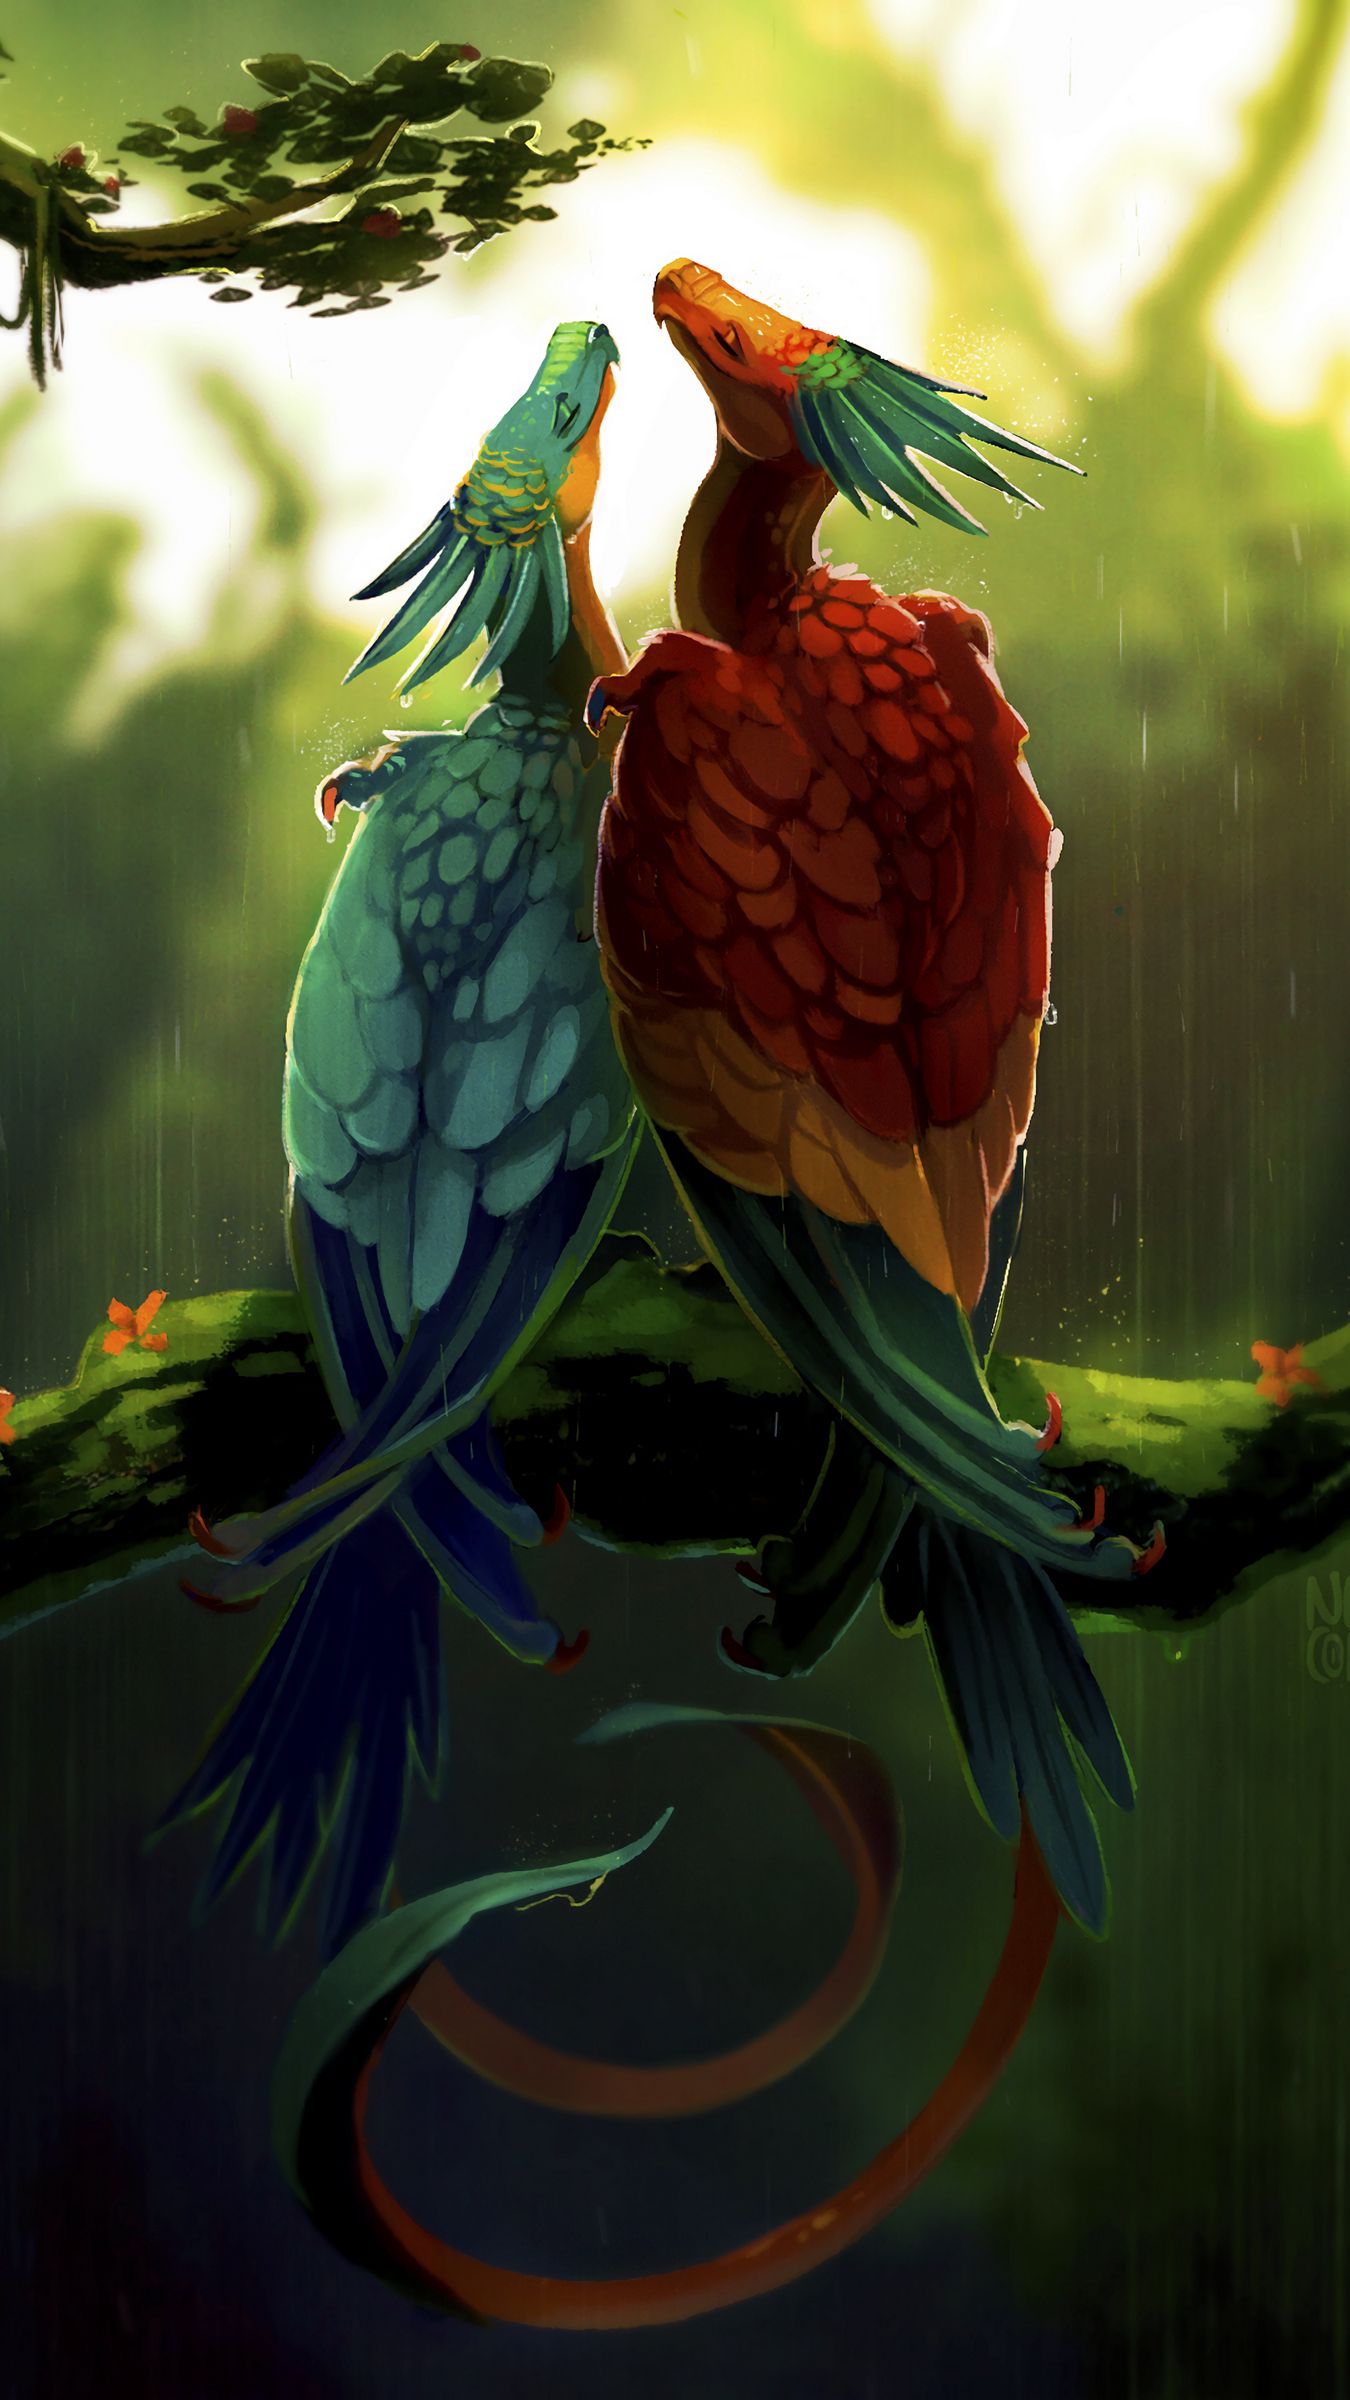 Download wallpaper 1350x2400 birds, dragons, art, fiction, colorful, pair,  rain iphone 8+/7+/6s+/6+ for parallax hd background